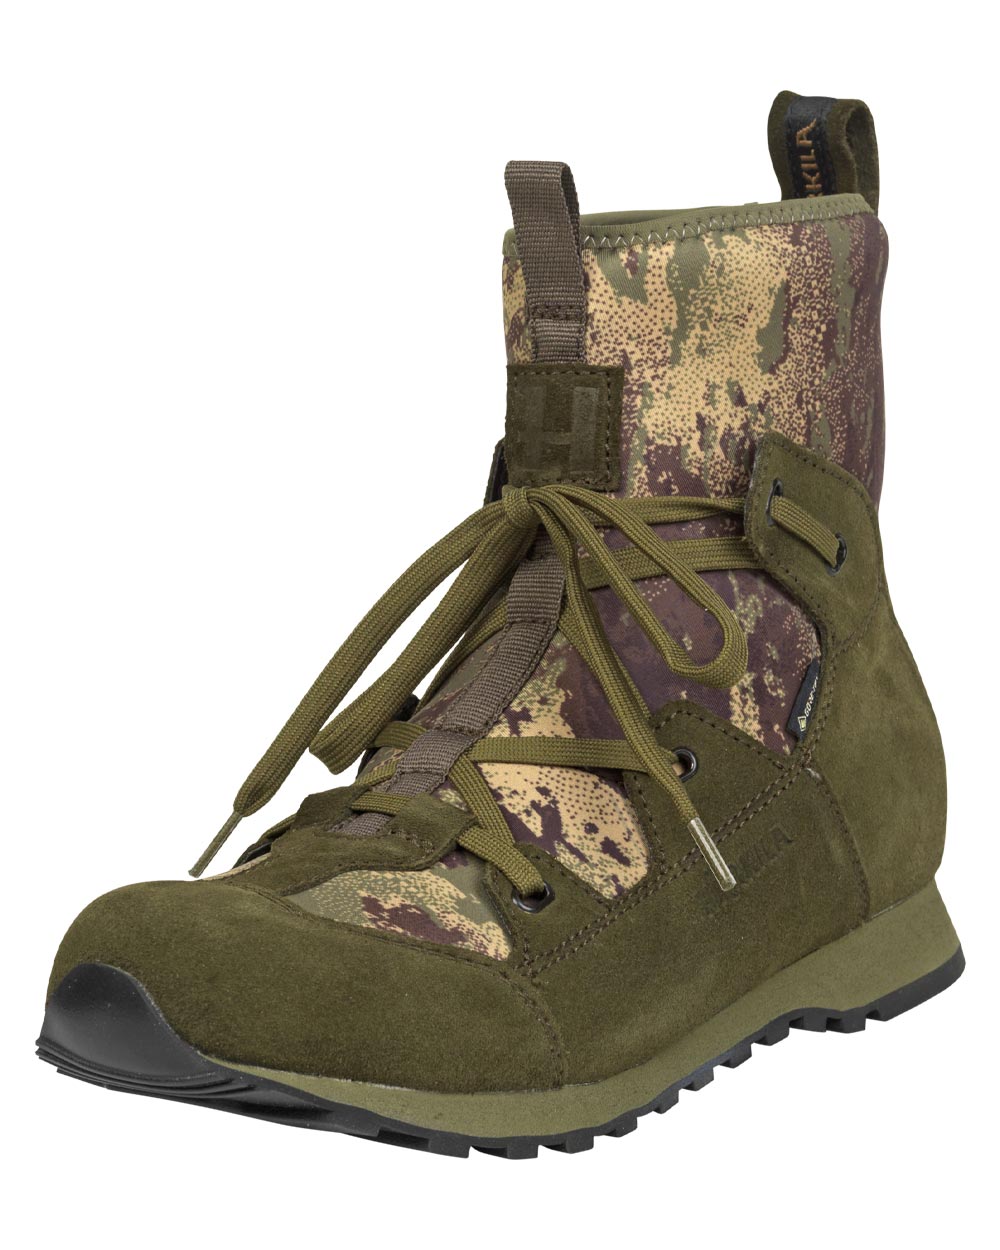 AXIS Forest coloured Harkila Stalking Sneaker GTX Boots on White background